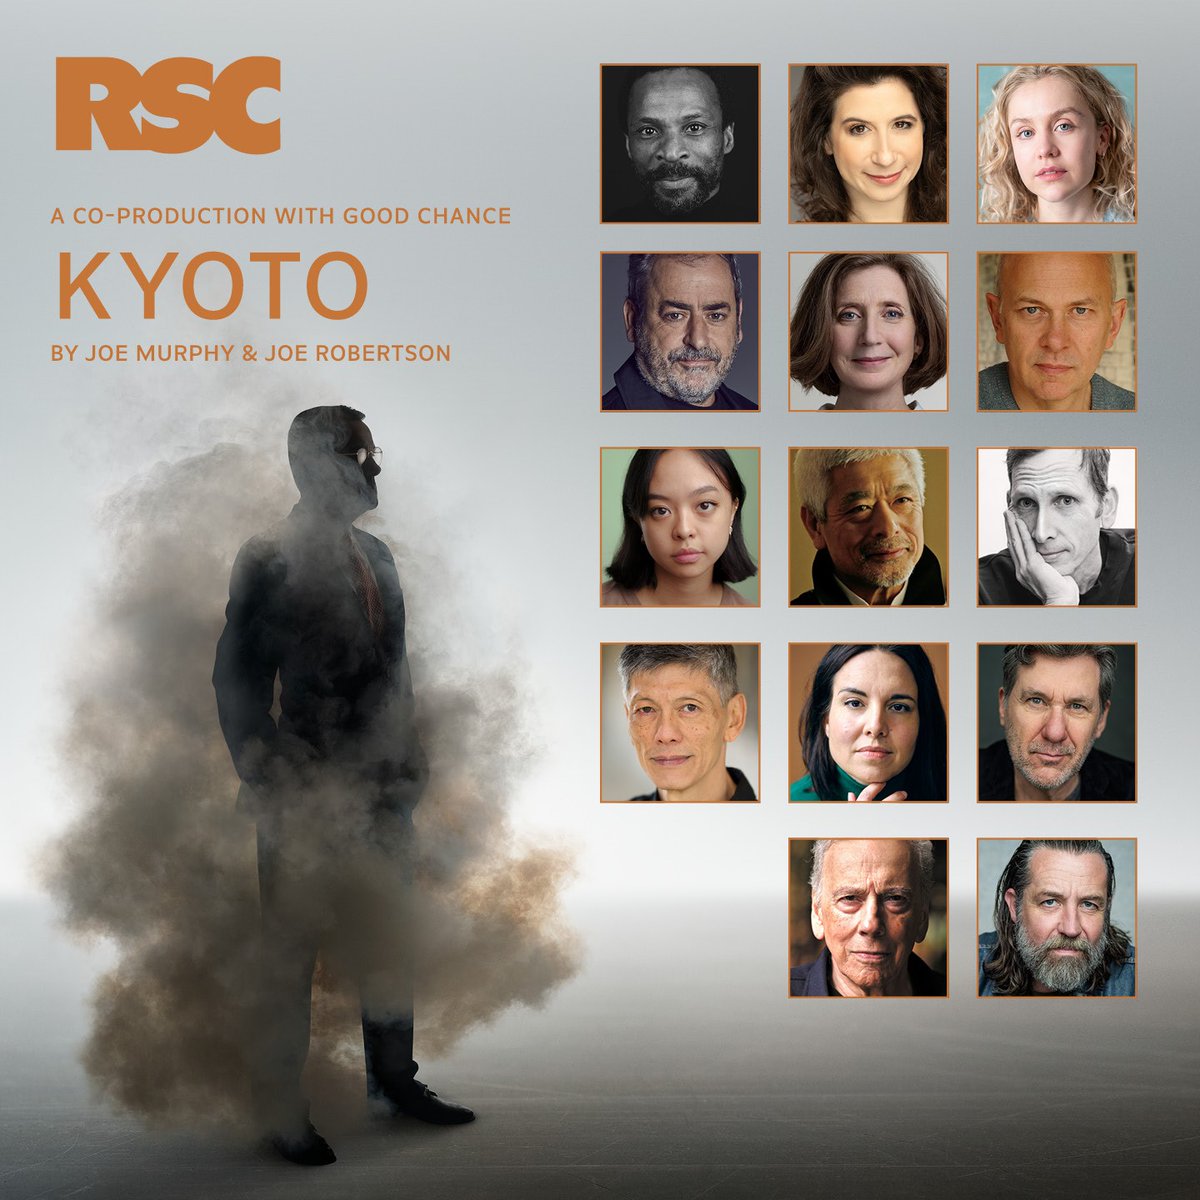 Exciting news! @TheRSC today announced their cast for #KyotoPlay by the playwrights Joe Murphy and Joe Robertson. 

Featuring a host of UA talent below...